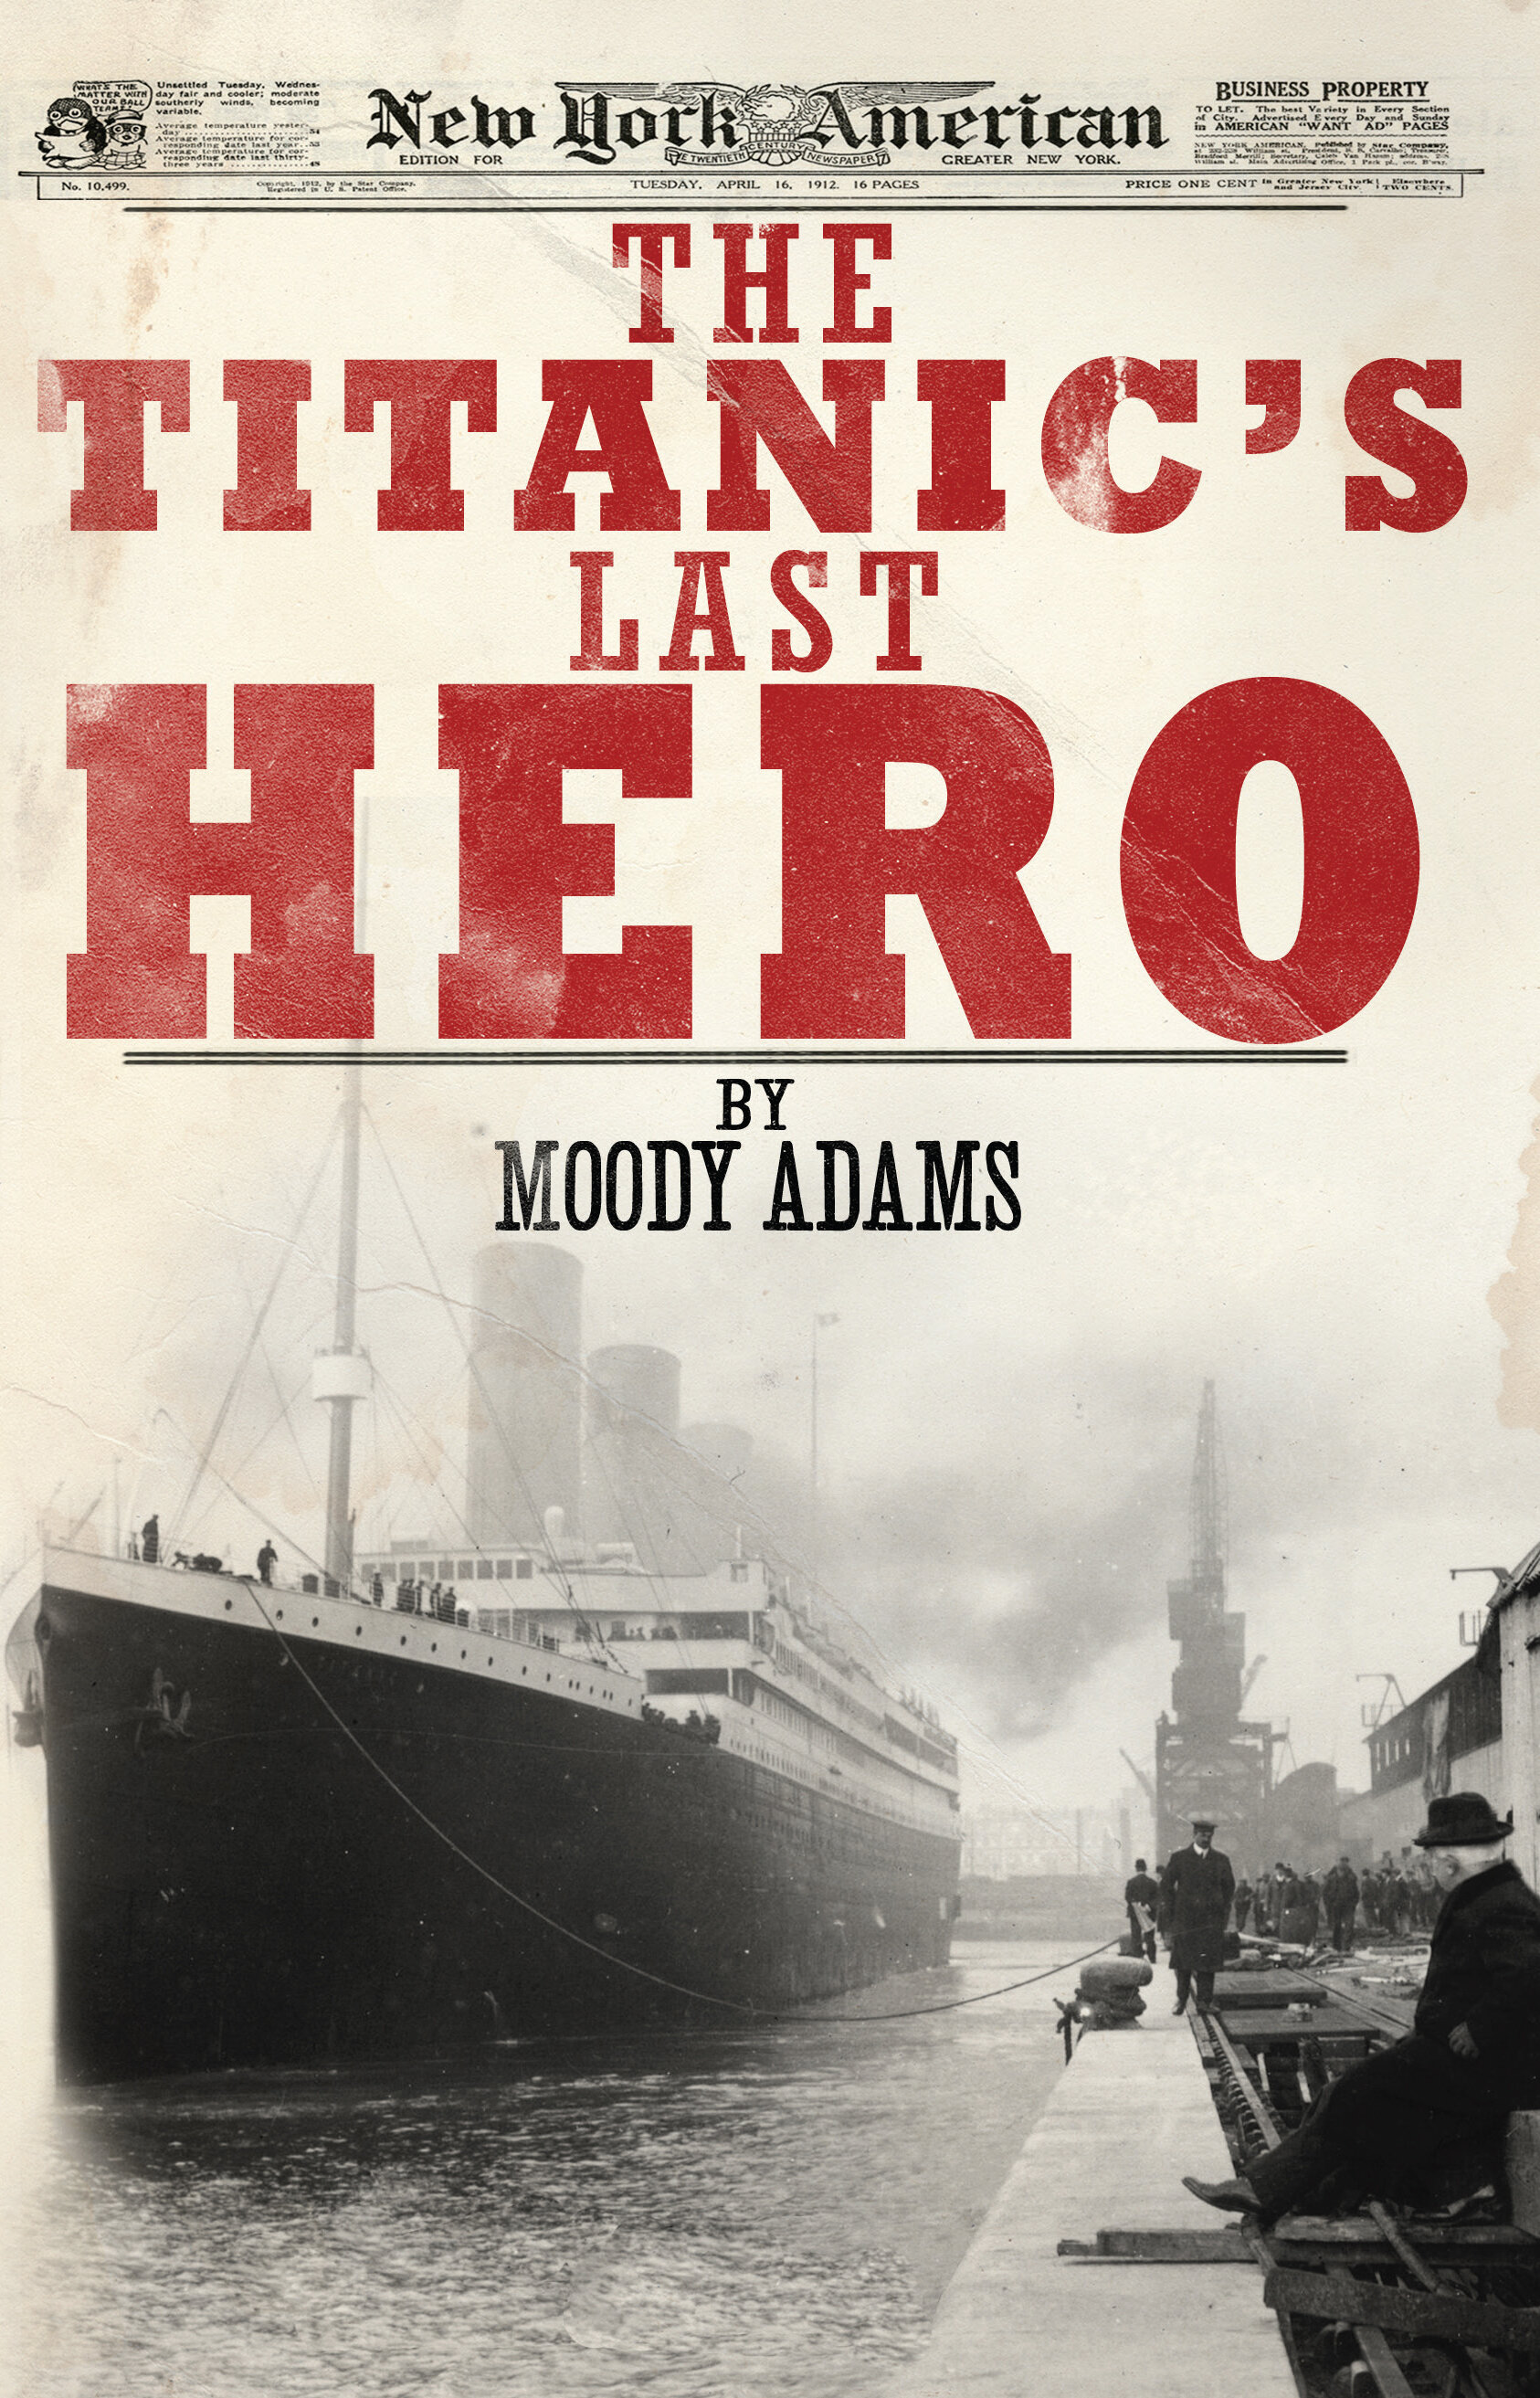 A　Faithlife　Your　True　Startling　Story　Forever　That　Can　Hero:　Life　Change　The　Last　Titanic's　Ebooks